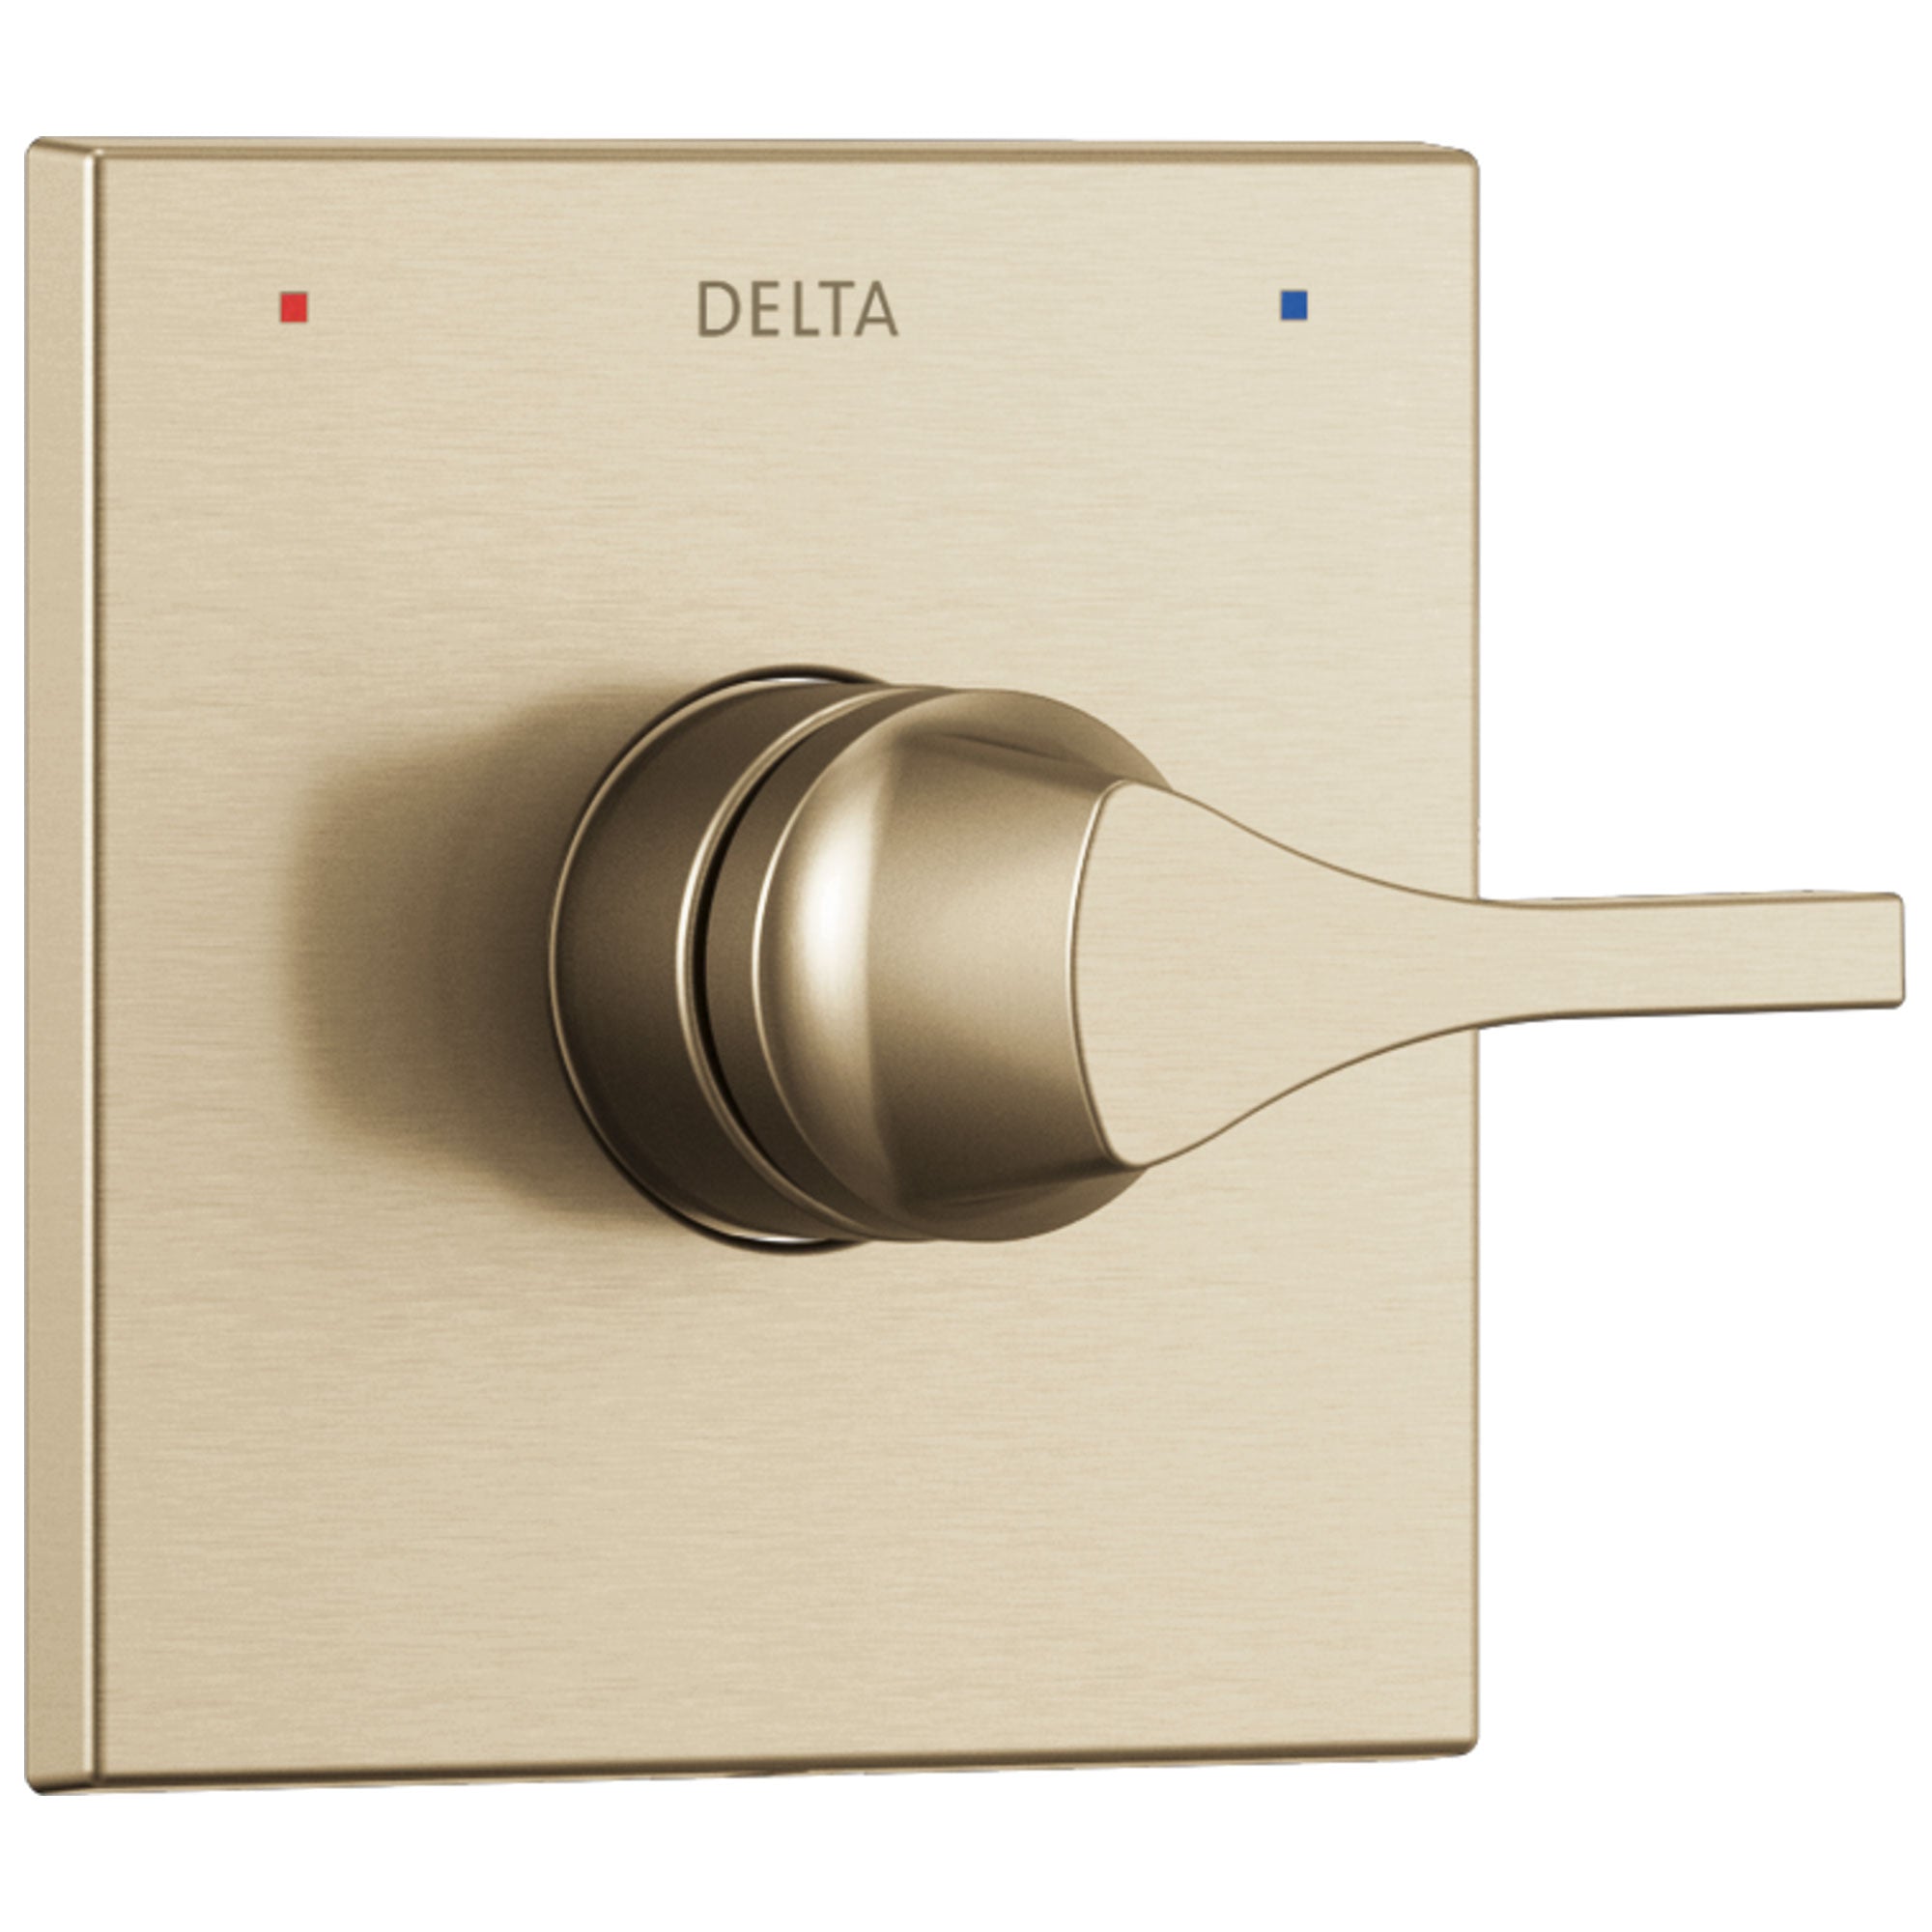 Delta Zura Champagne Bronze Finish Monitor 14 Series Shower Faucet Control Only Includes Handle, Cartridge, and Valve with Stops D3643V